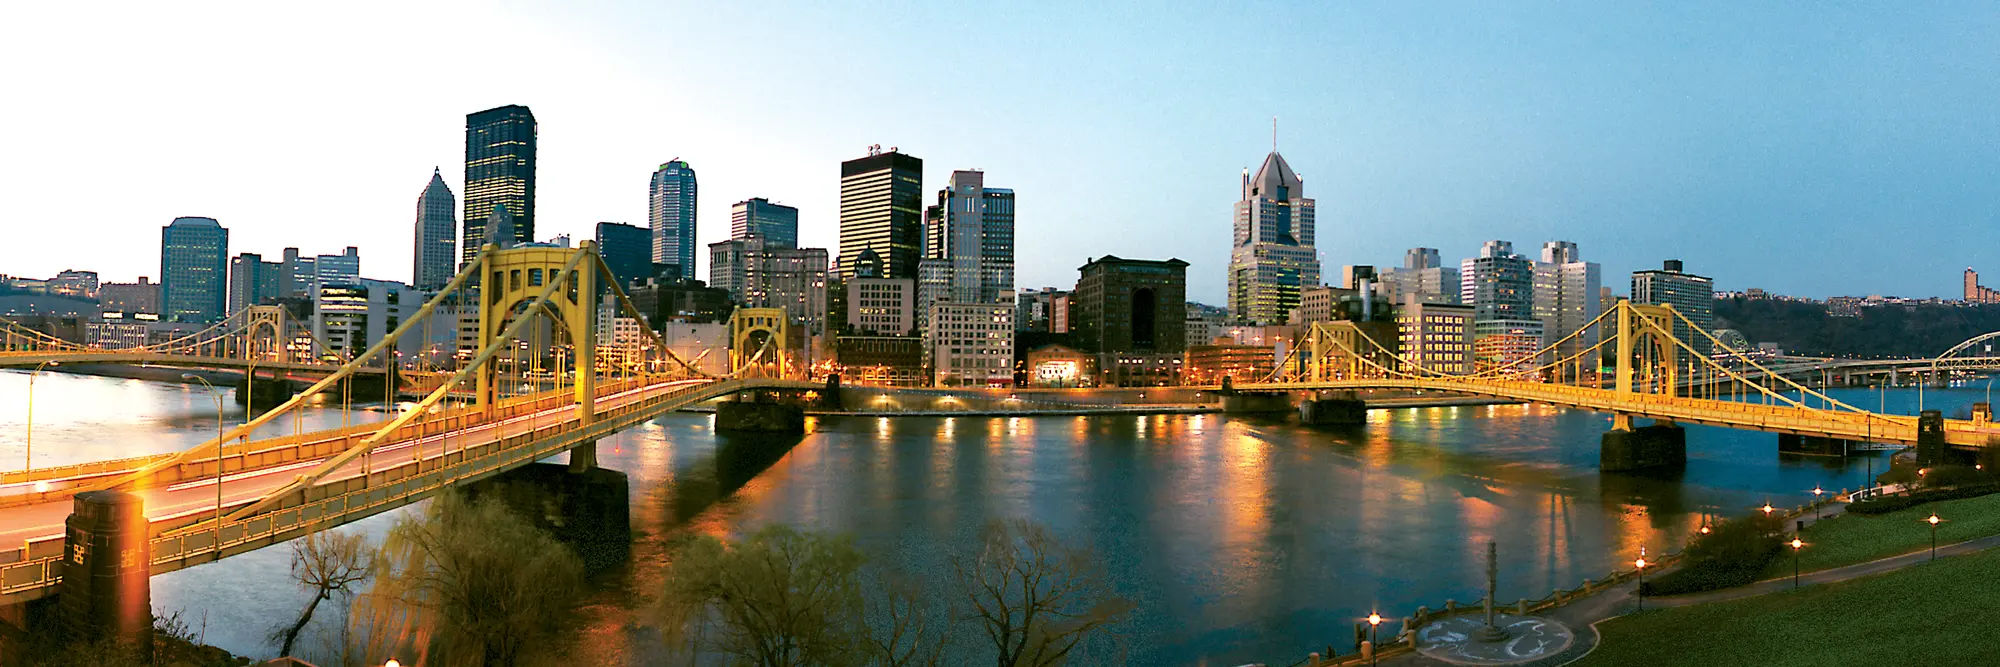 Downtown Pittsburgh, captured at dawn.